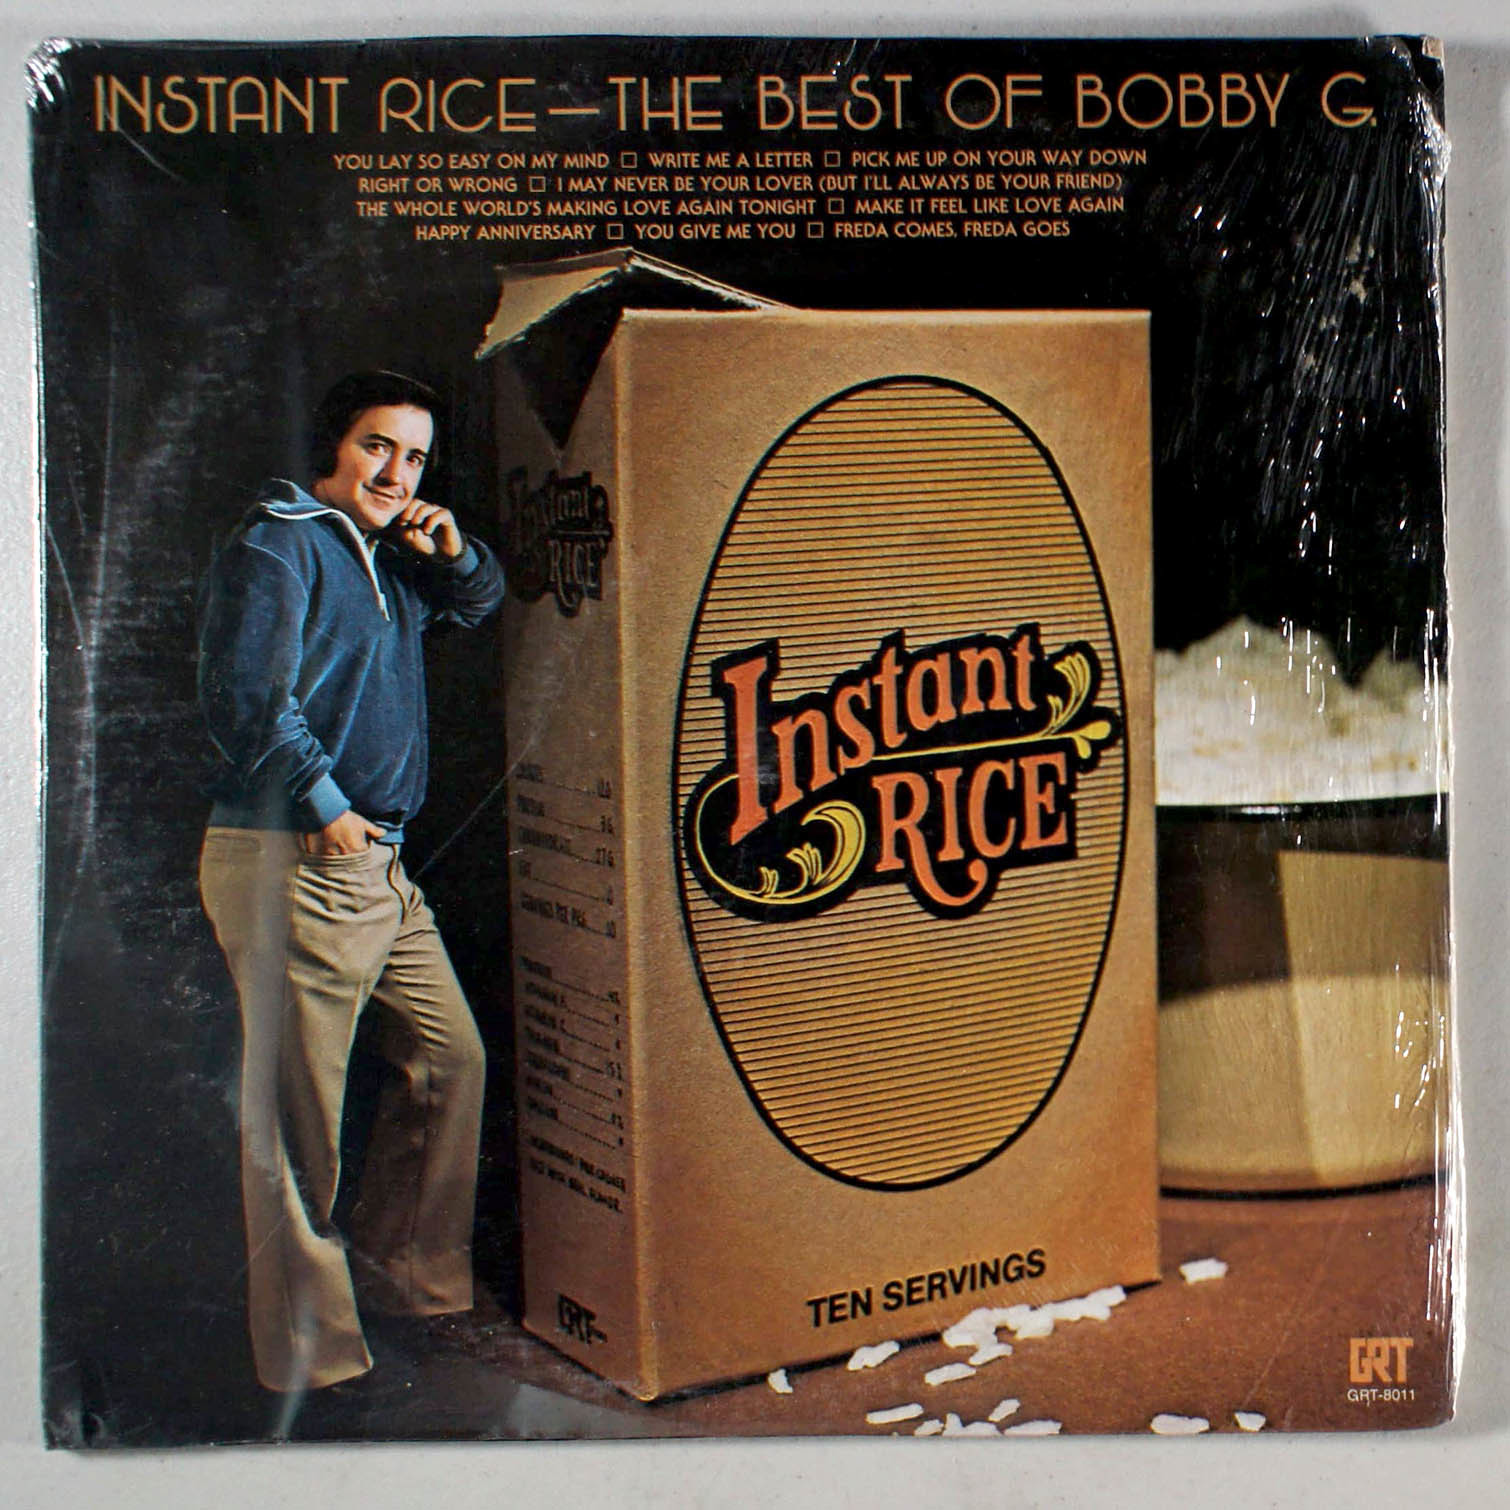 Primary image for Bobby G. Rice - The Best of: Instant (1976) [SEALED] Vinyl LP • Greatest Hits